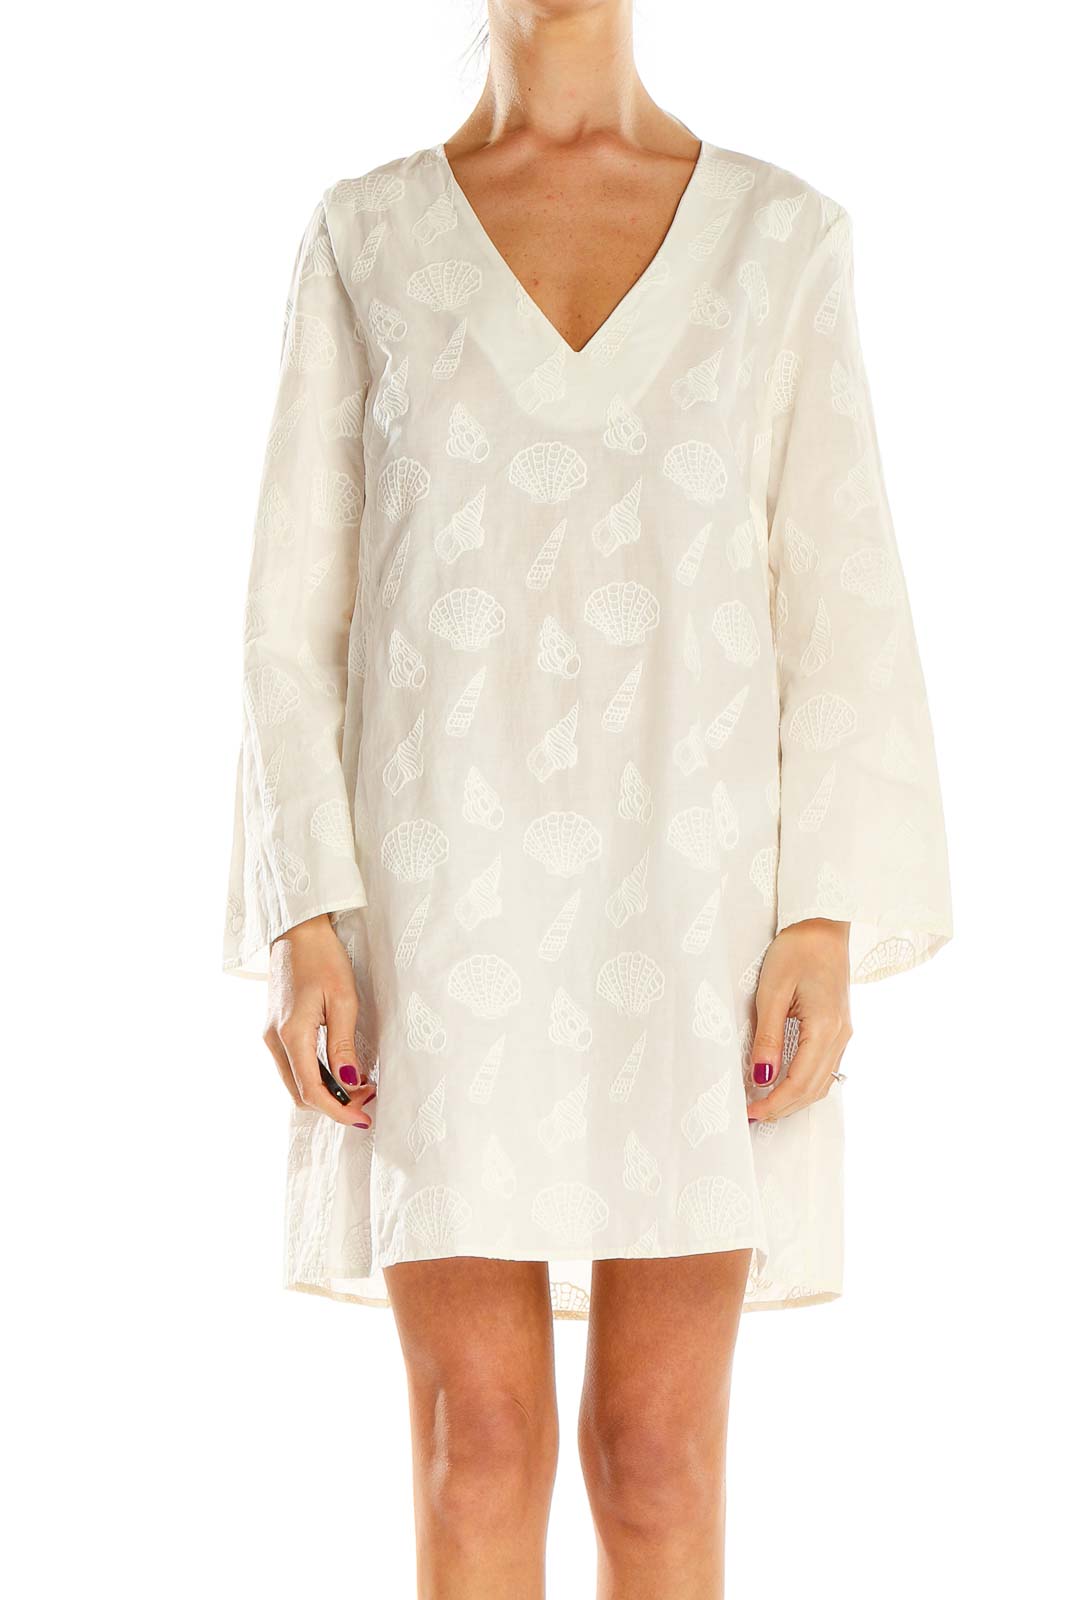 White Embroidered Shift Dress Front